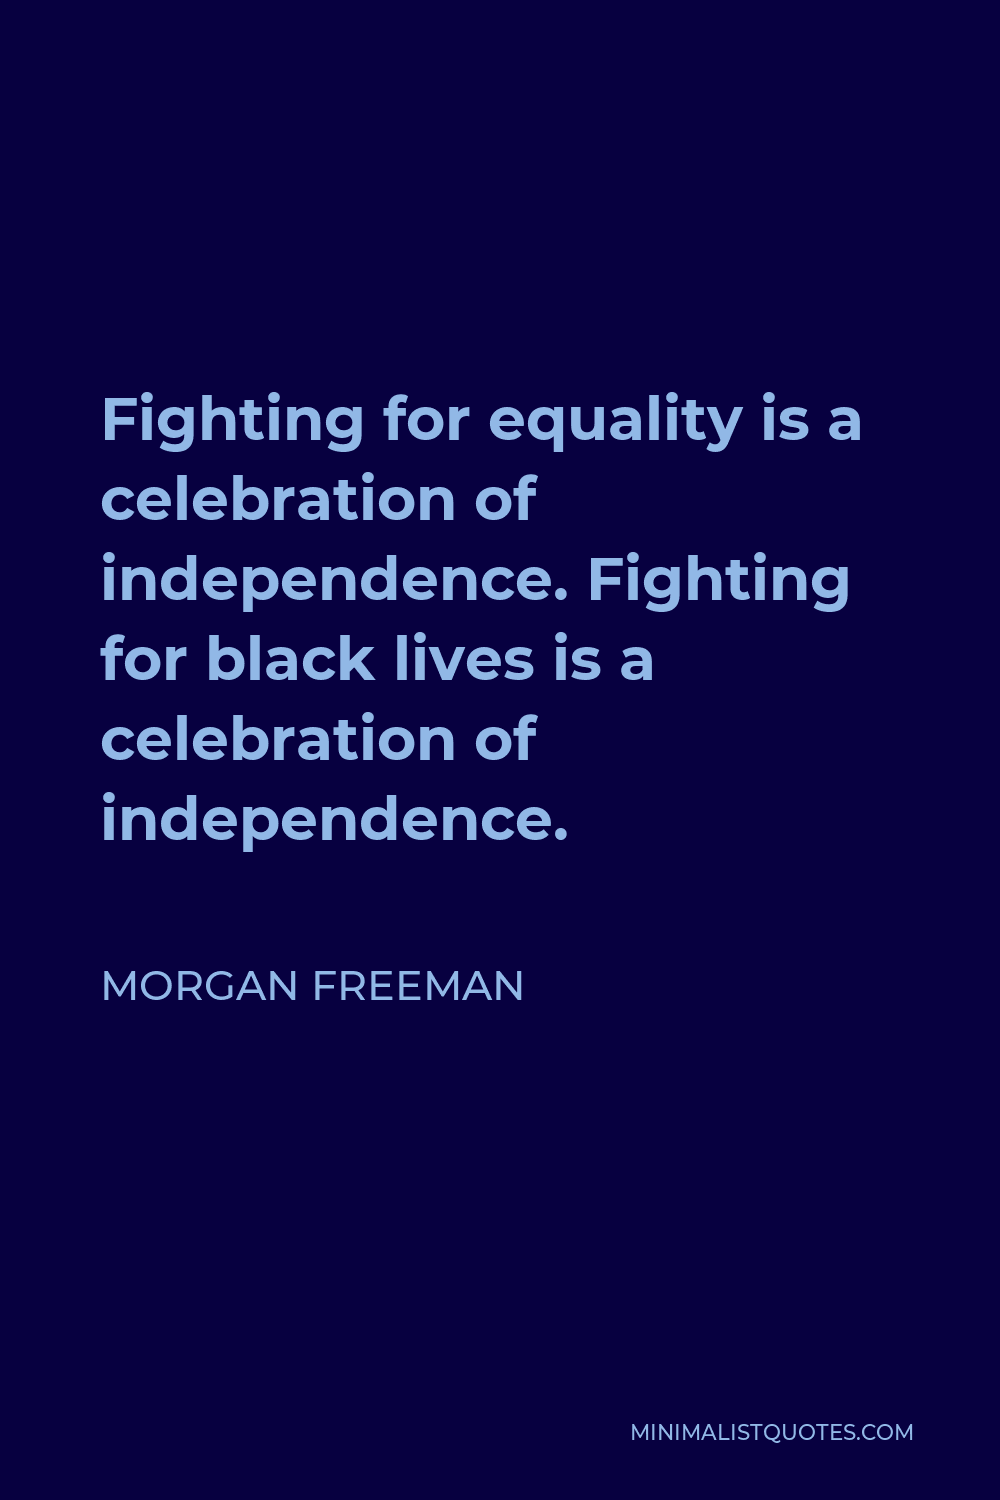 Morgan Freeman Quote - Fighting for equality is a celebration of independence. Fighting for black lives is a celebration of independence.